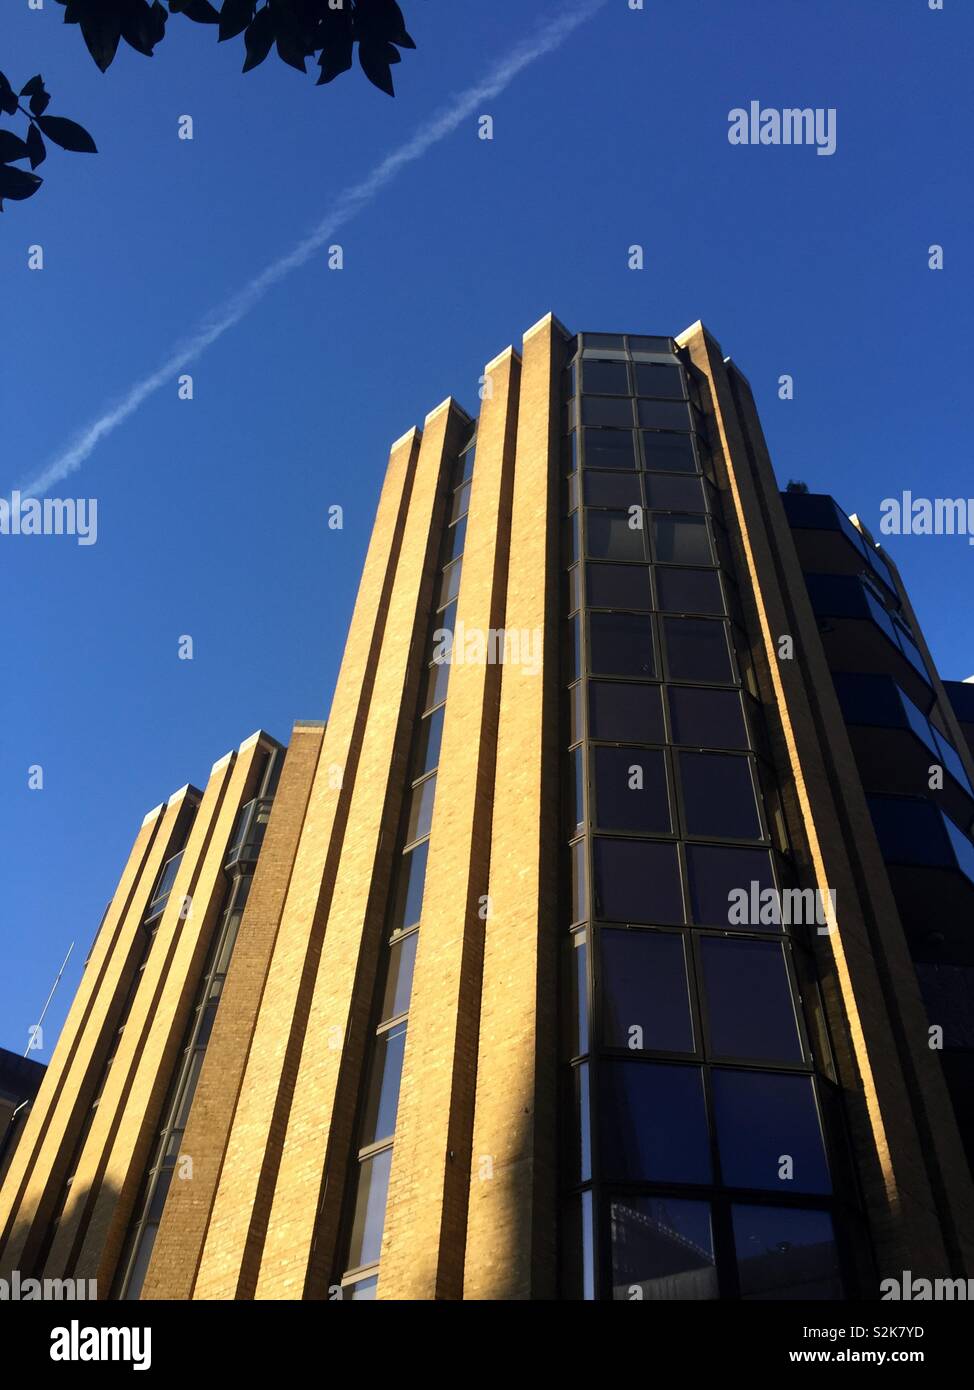 Tall building Stock Photo